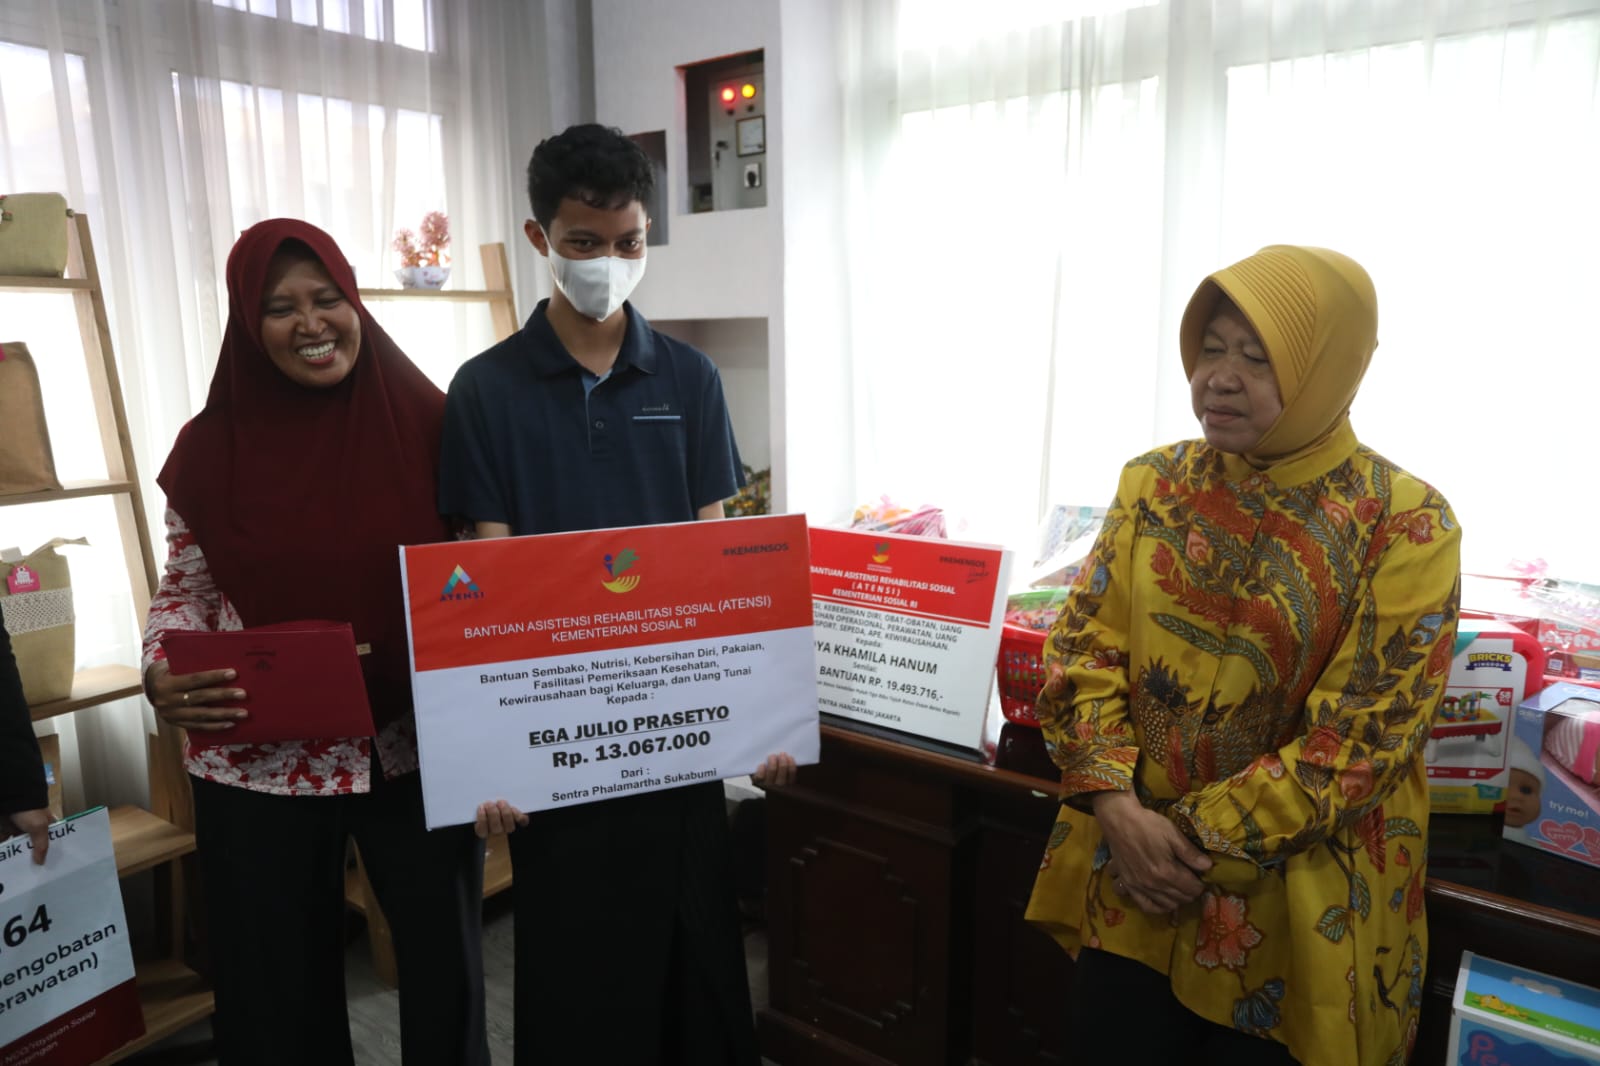 Minister of Social Affairs Hands Over ATENSI Assistance and Donations to kitabisa.com at Mulya Jaya Center